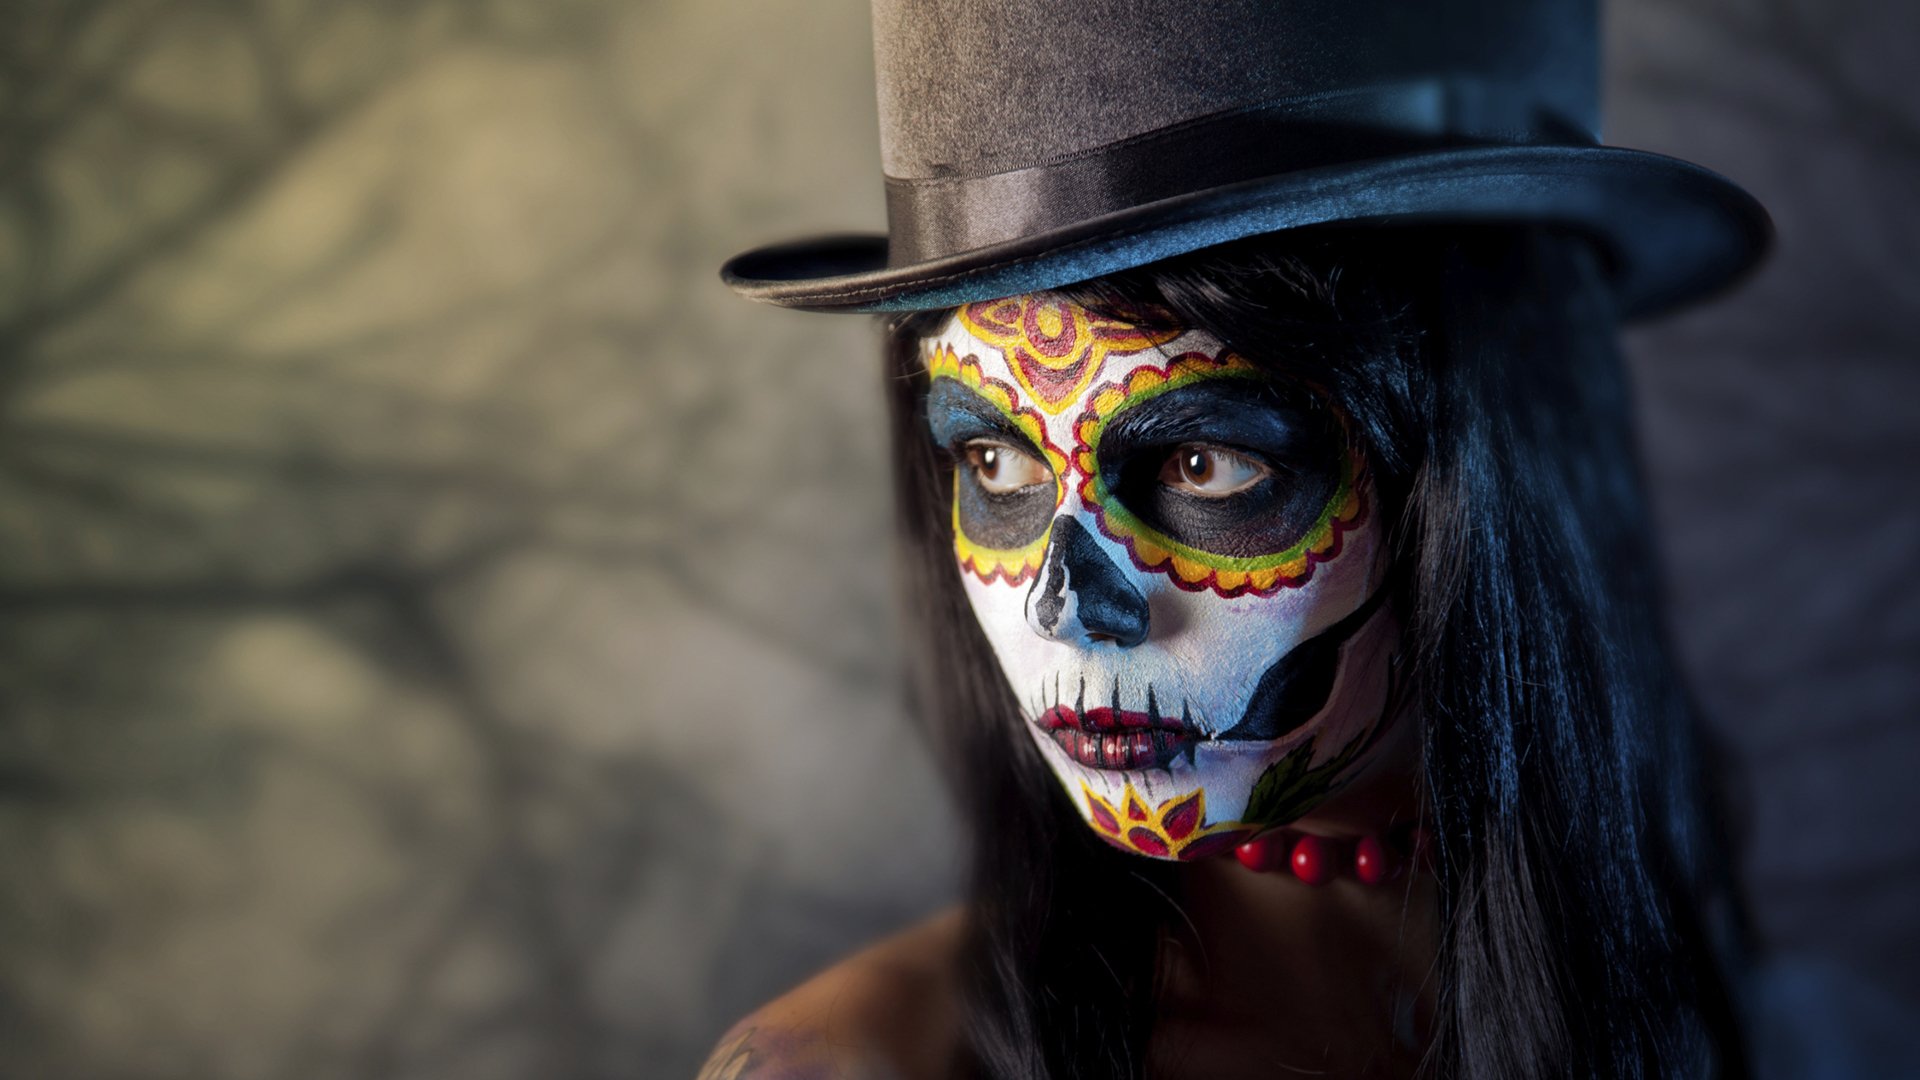 HD wallpaper of a person wearing a sugar skull makeup and top hat, artistically captured against a blurred background.